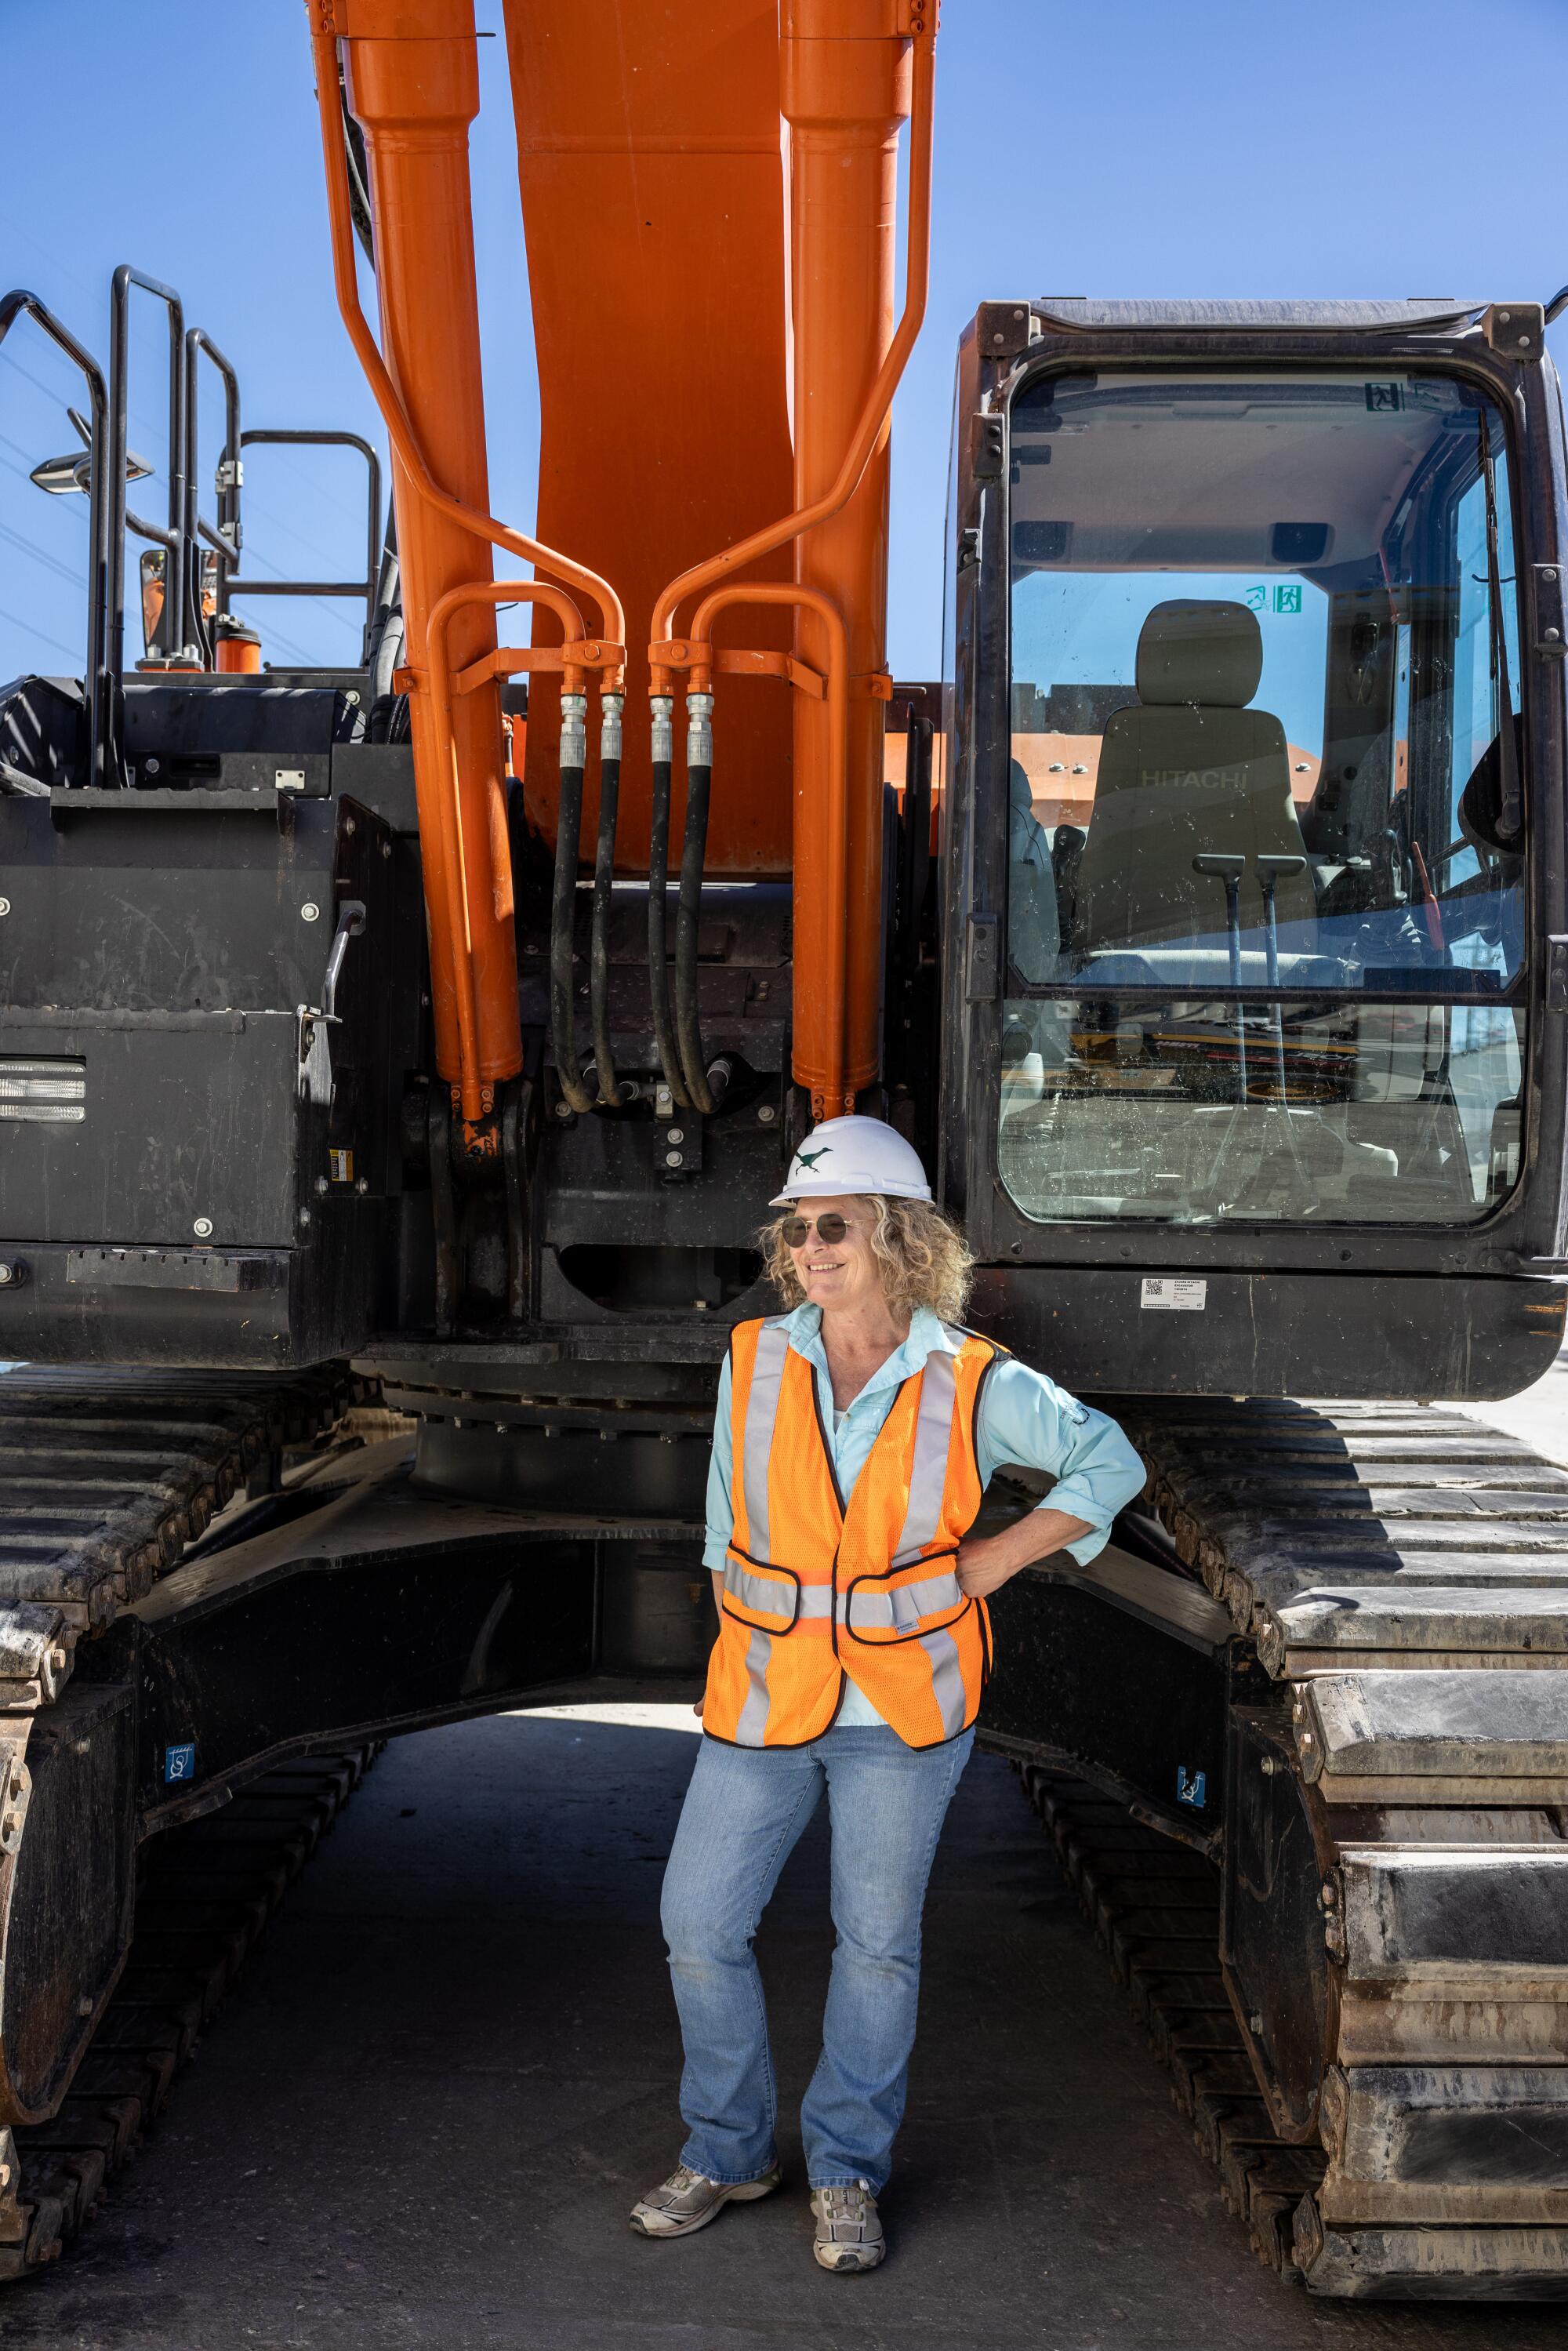 Artist Lauren Bon, in hard hat and a bright safety vest, stands next to an excavator in the concrete bed of the L.A. River